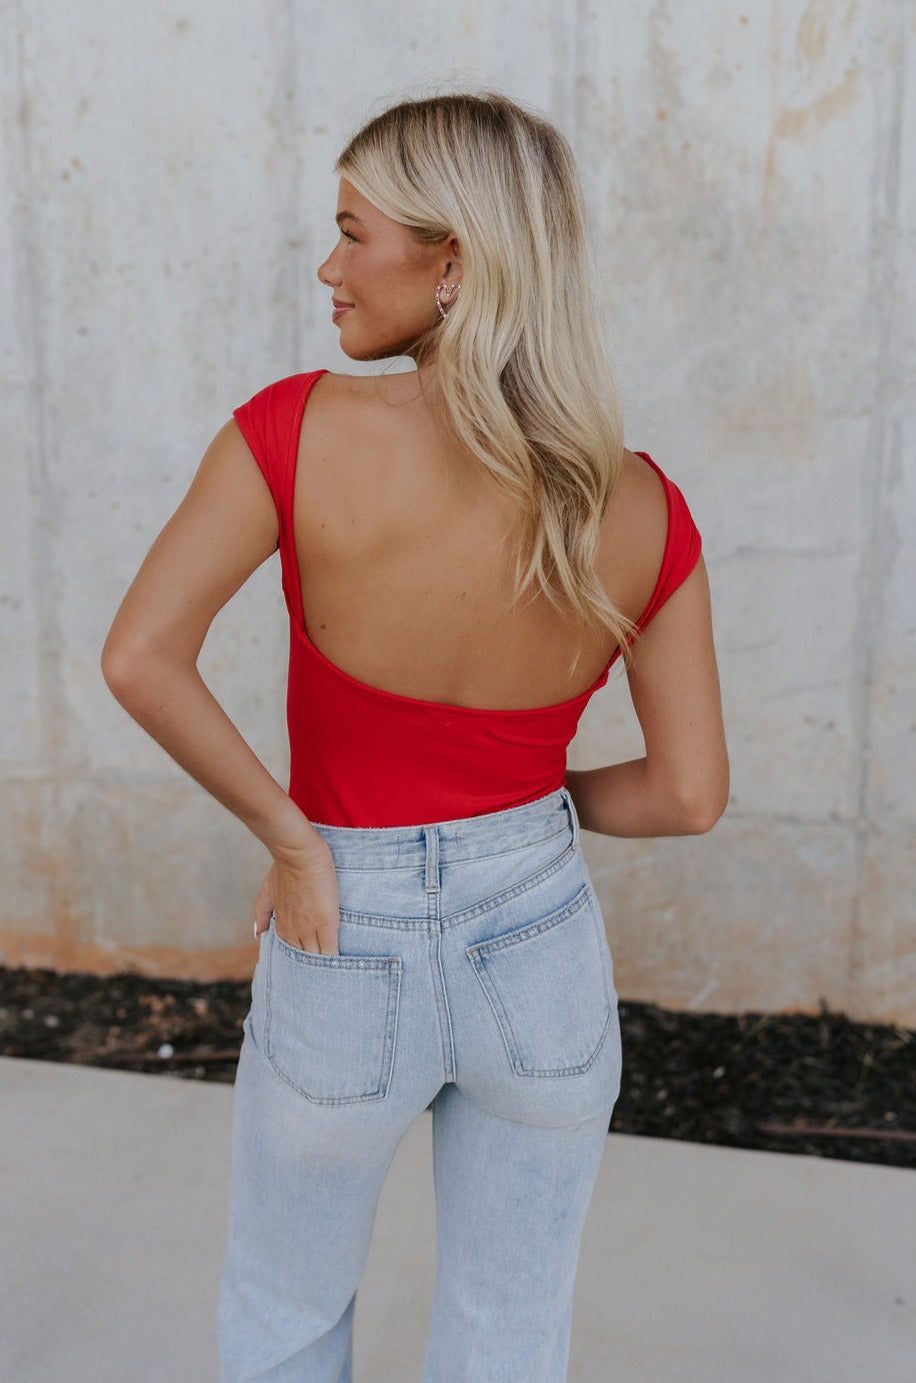 Back view of female model wearing the Ryleigh Red Backless Bodysuit that has red knit fabric, an open back, and a scoop neckline. Worn with jeans.